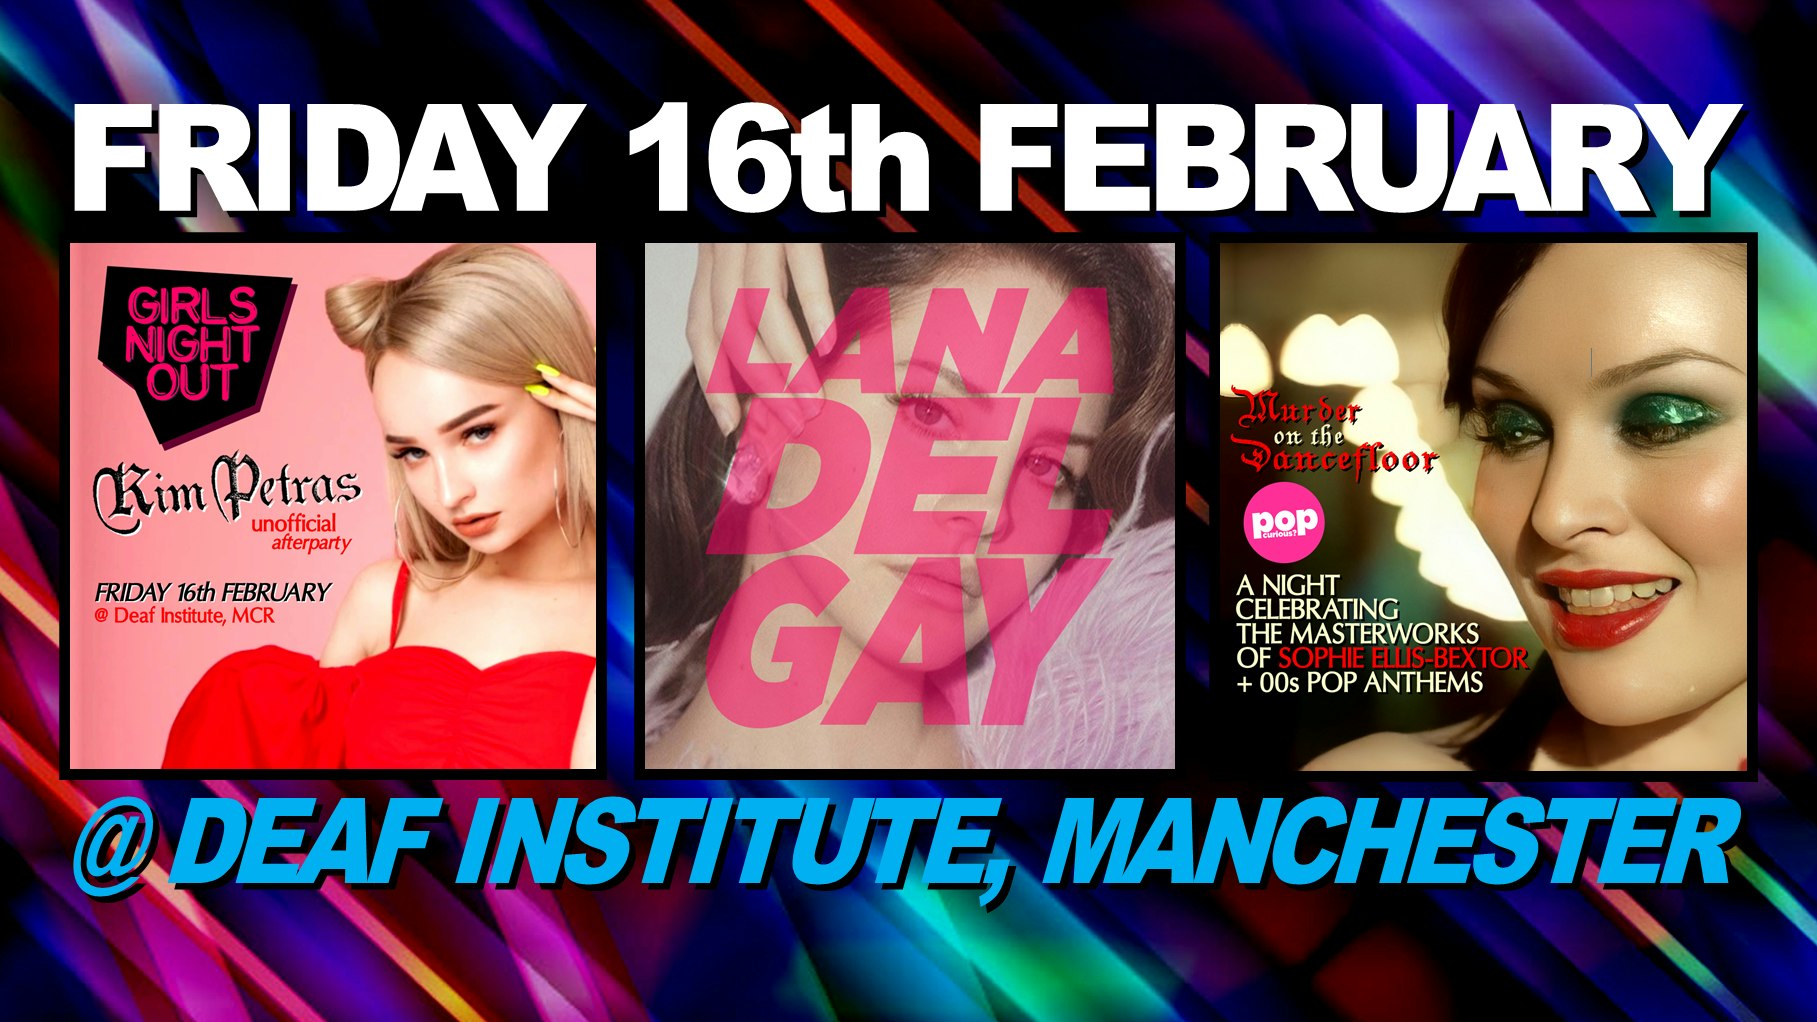 Girls Night Out + Lana Del Gay + Pop Curious? ‘Murder On The Dancefloor